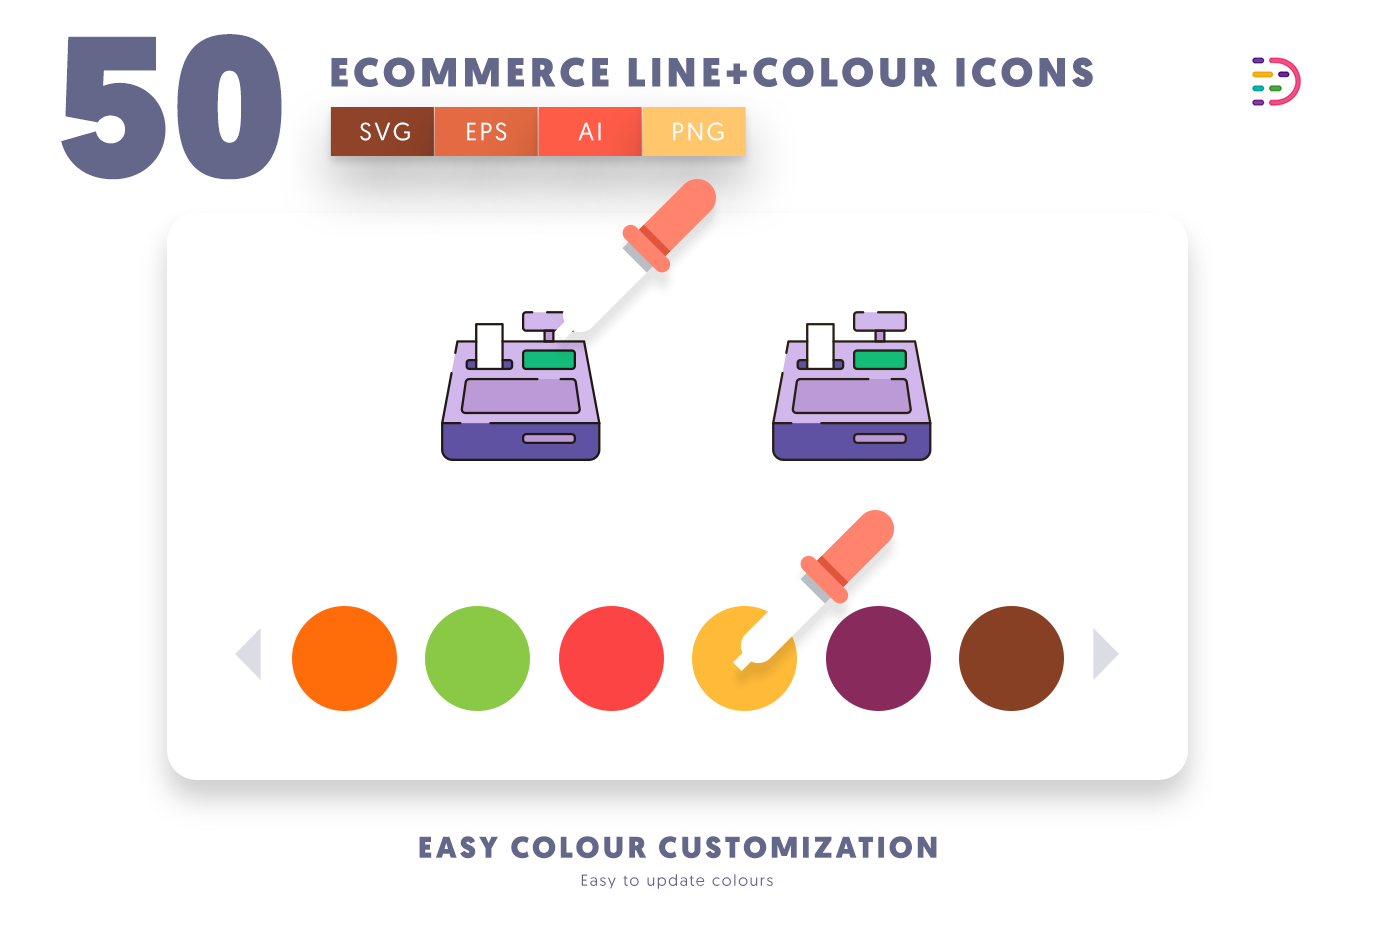 Customizable and vector 50 Ecommerce Line+Colour Icons